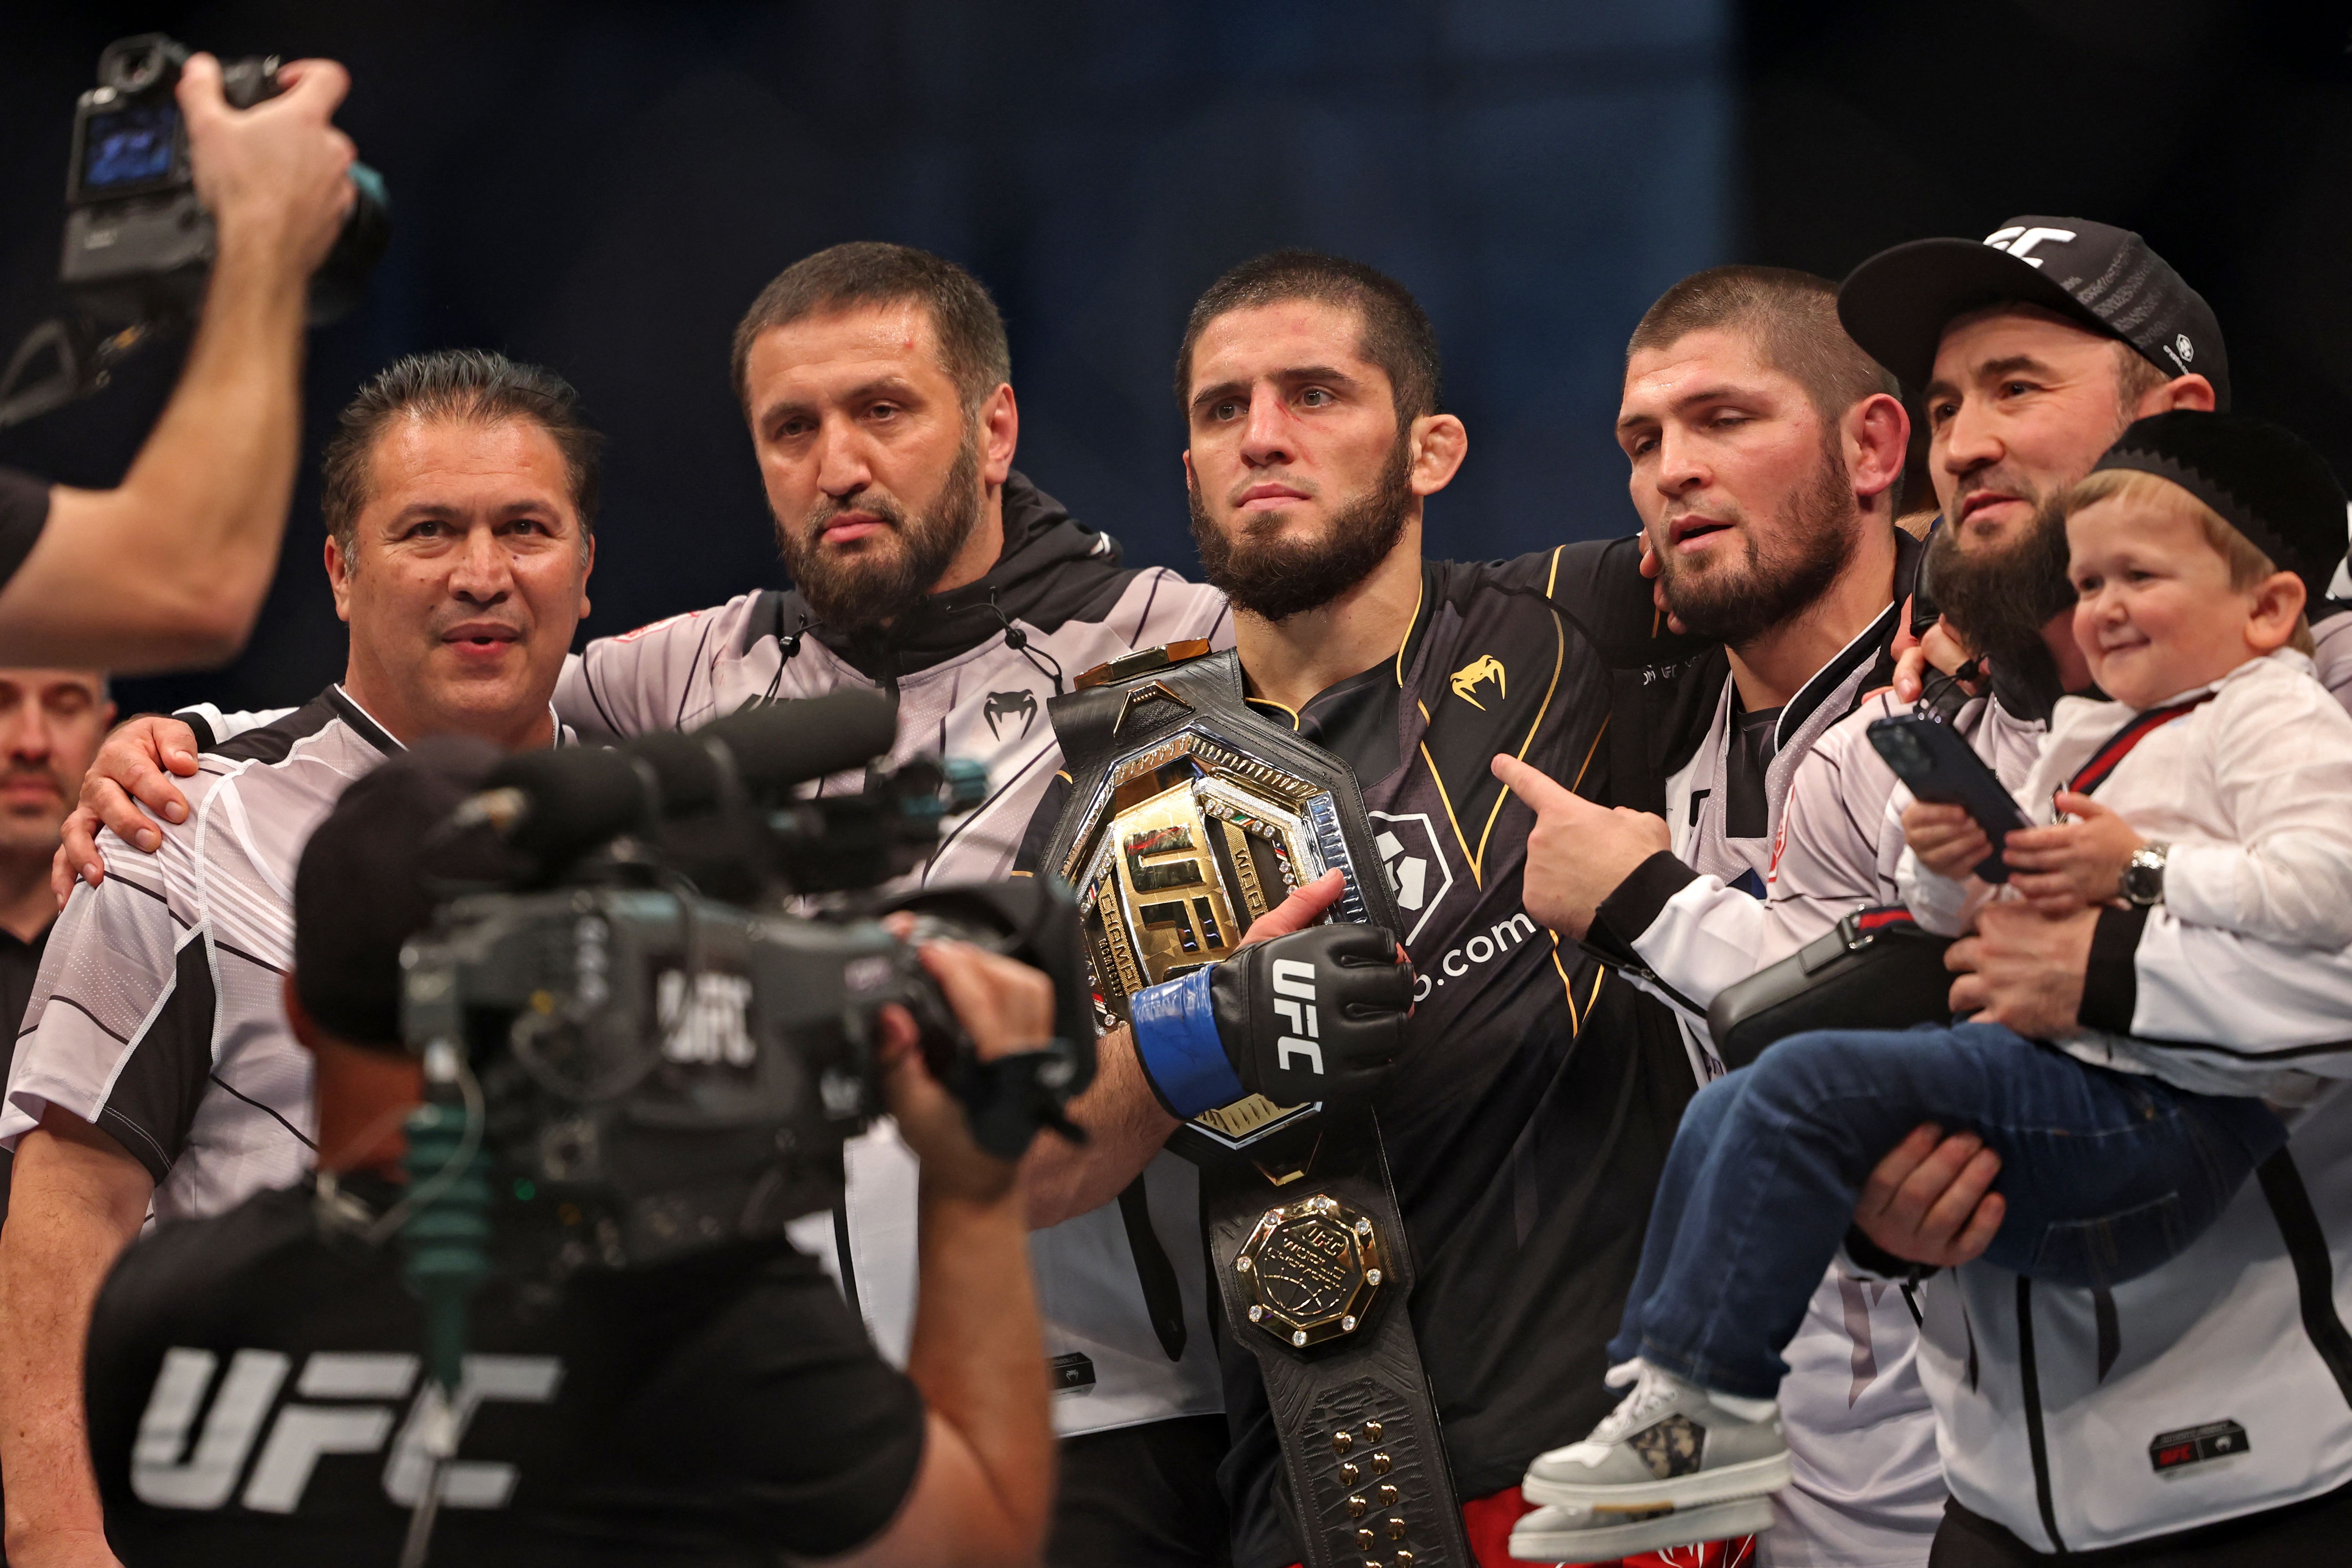 Islam Makhachev and his team